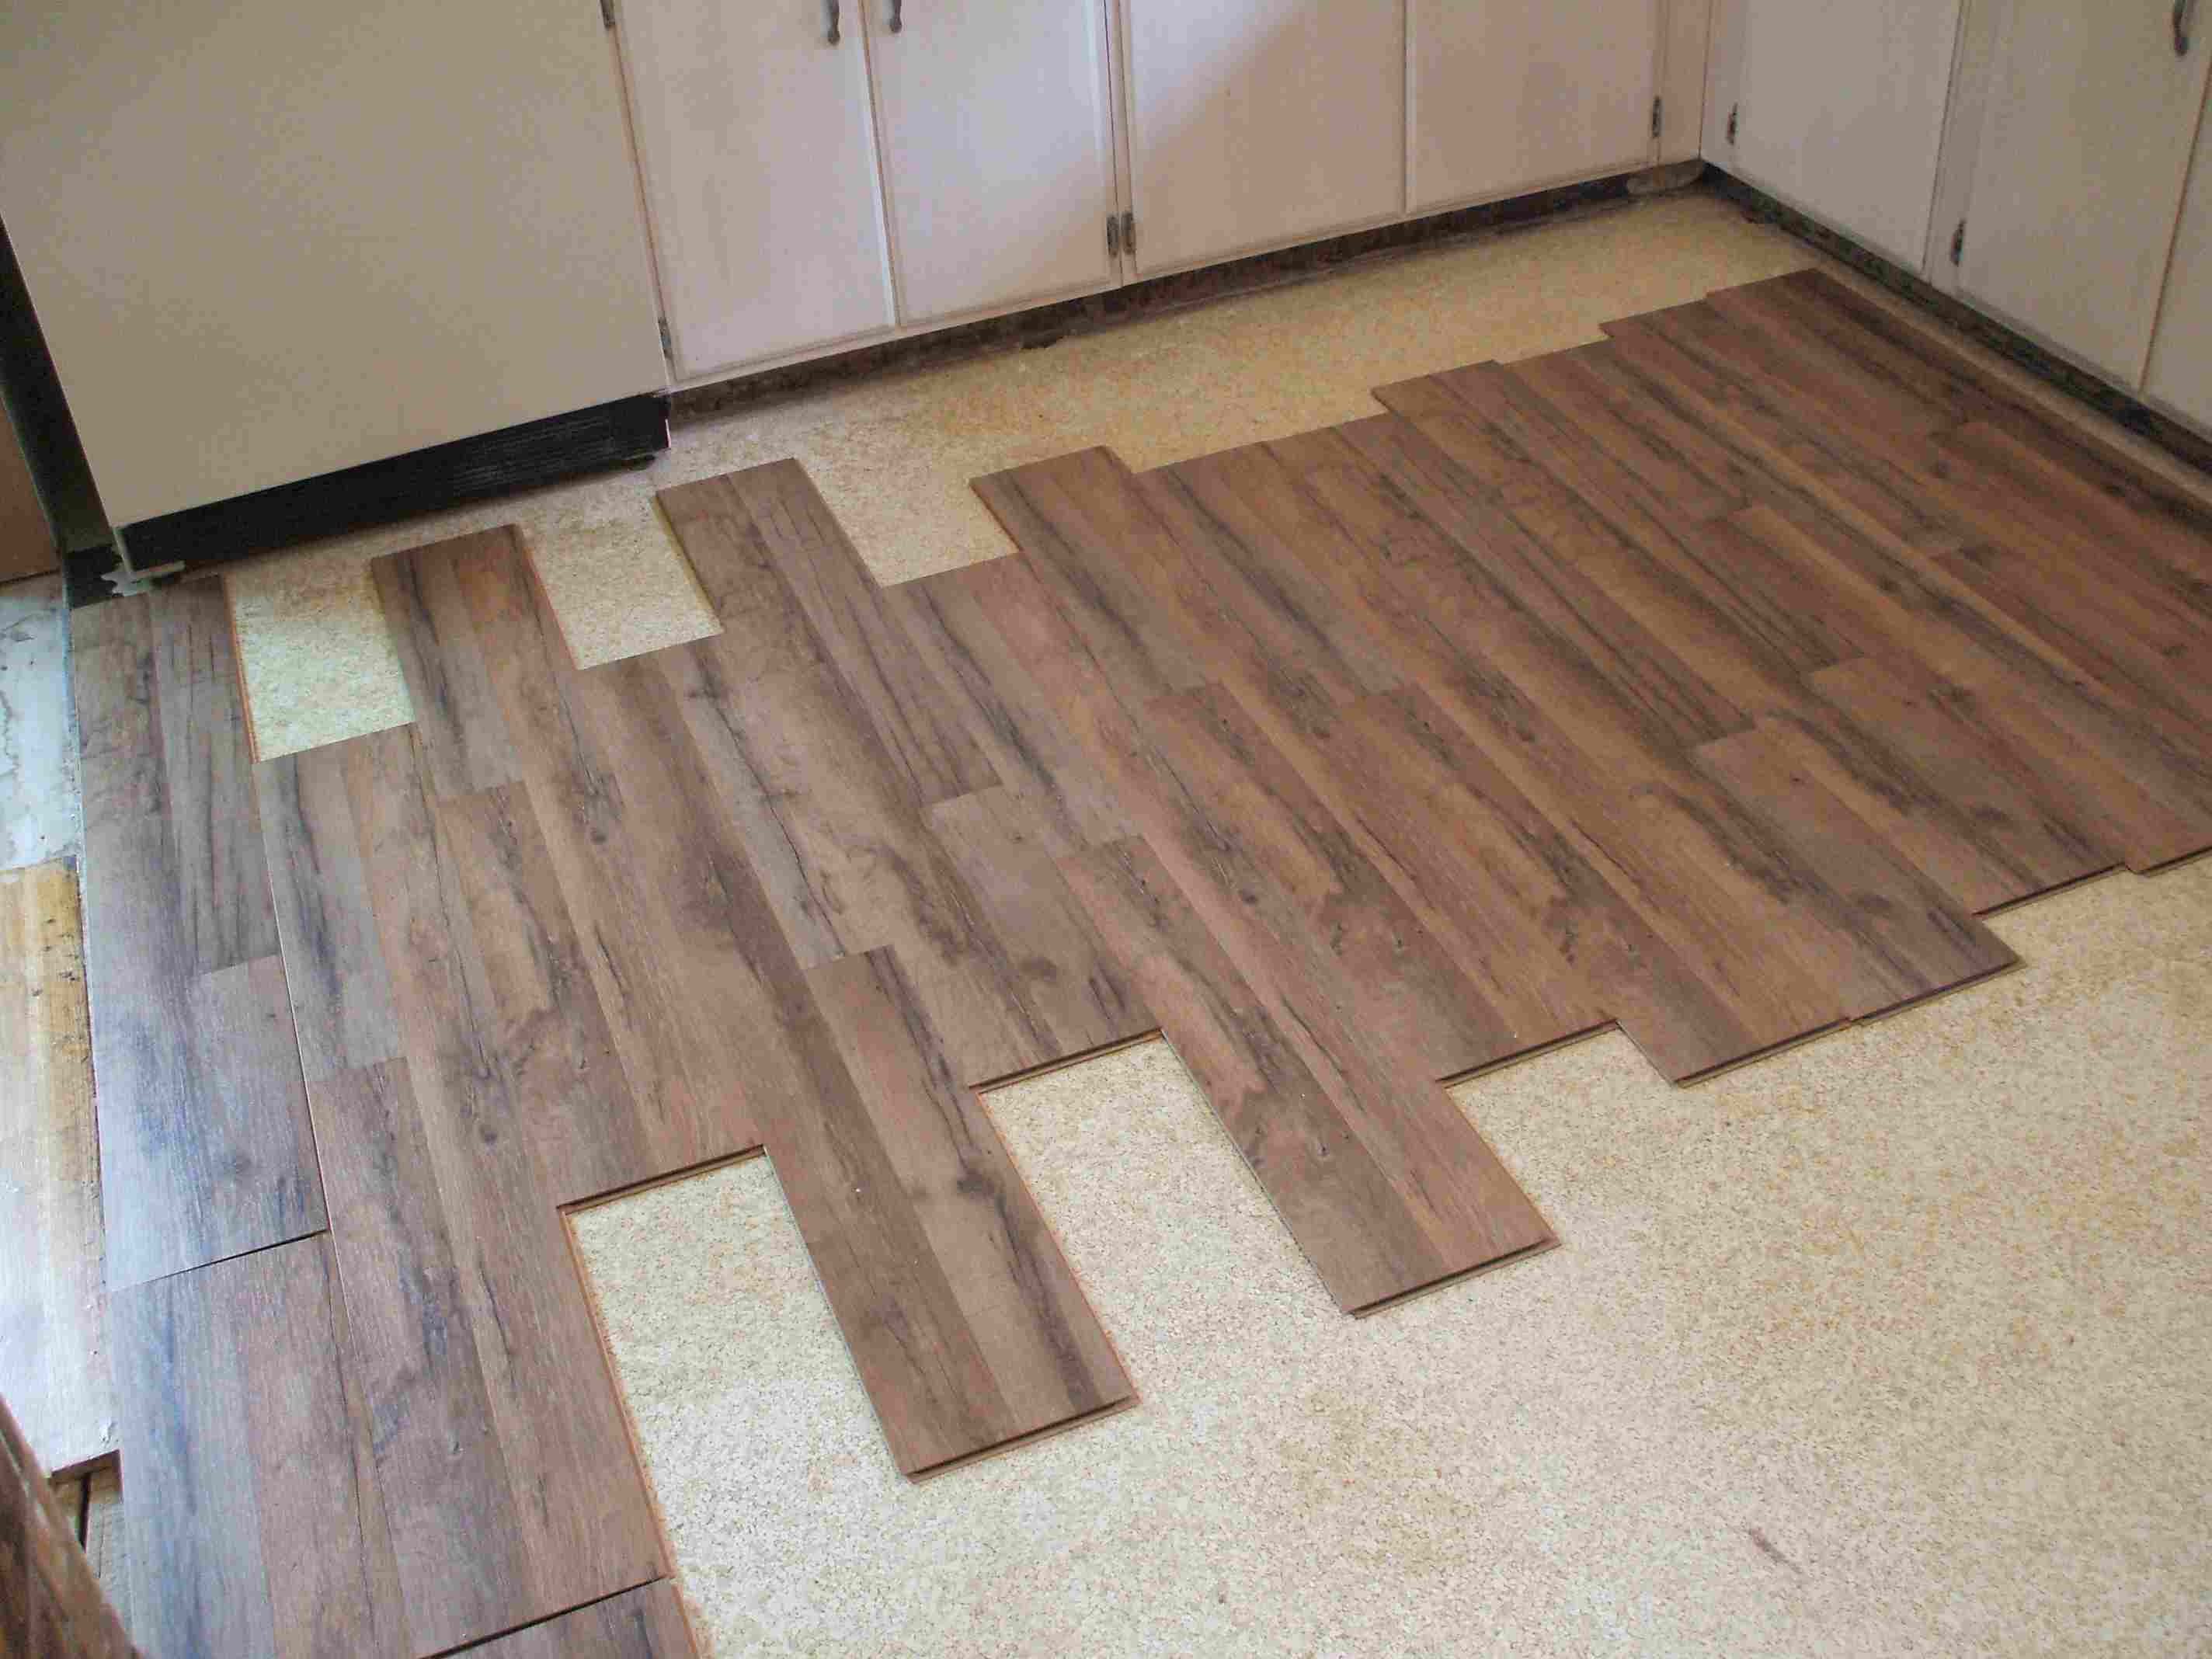 17 attractive How to Stain Hardwood Floors Video 2024 free download how to stain hardwood floors video of laminate flooring installation made easy with installing laminate eyeballing layout 56a49d075f9b58b7d0d7d693 jpg